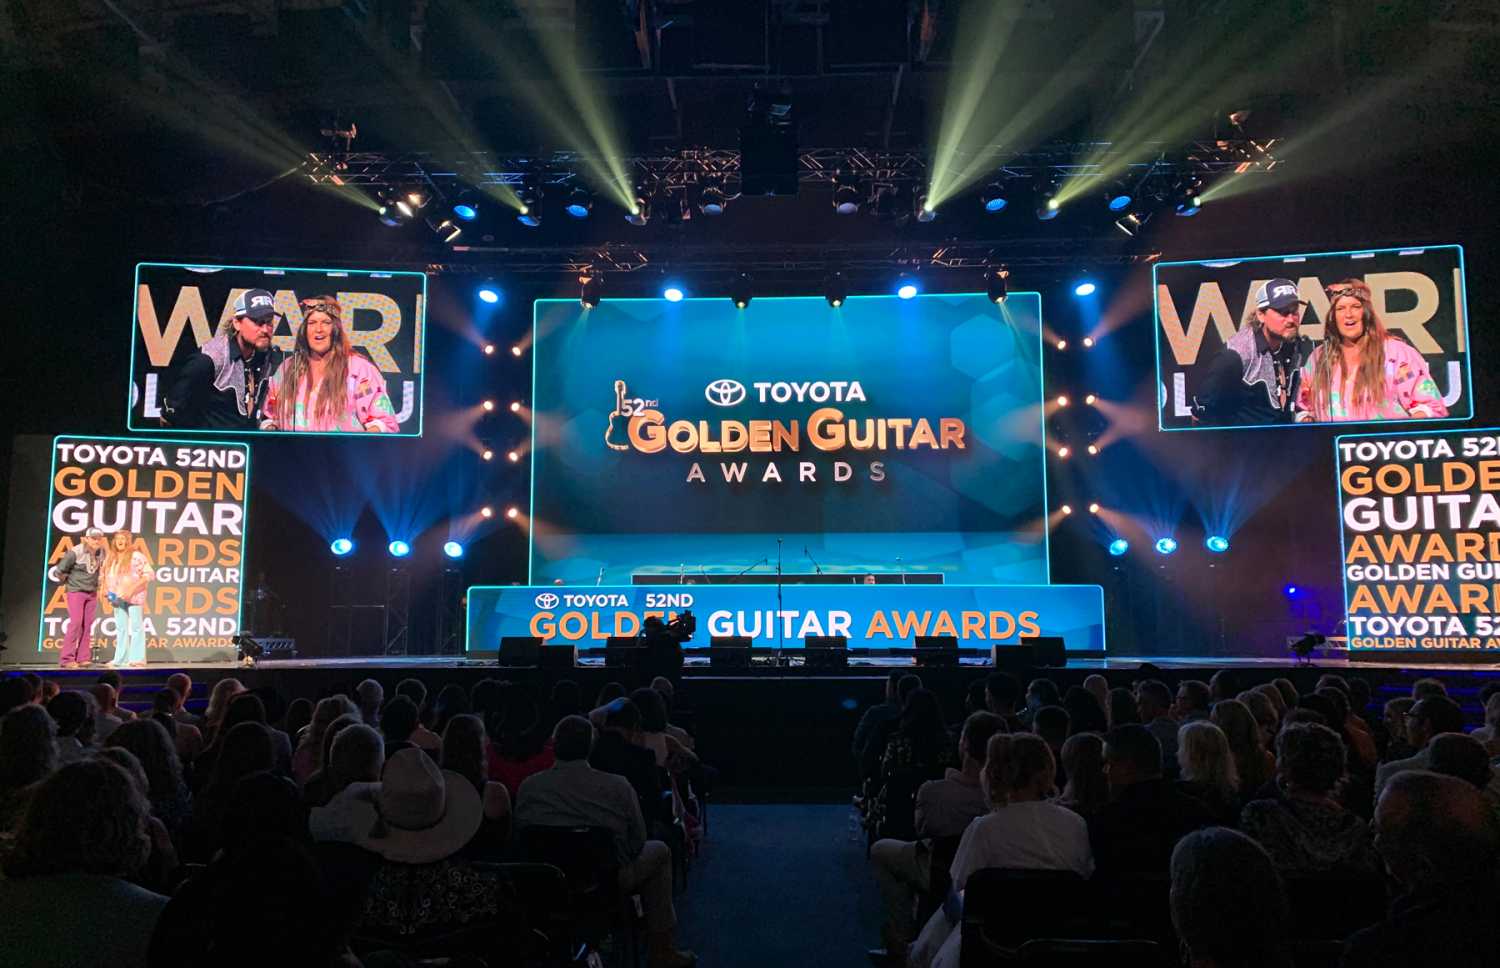 The festival culminates in the televised Golden Guitar Awards